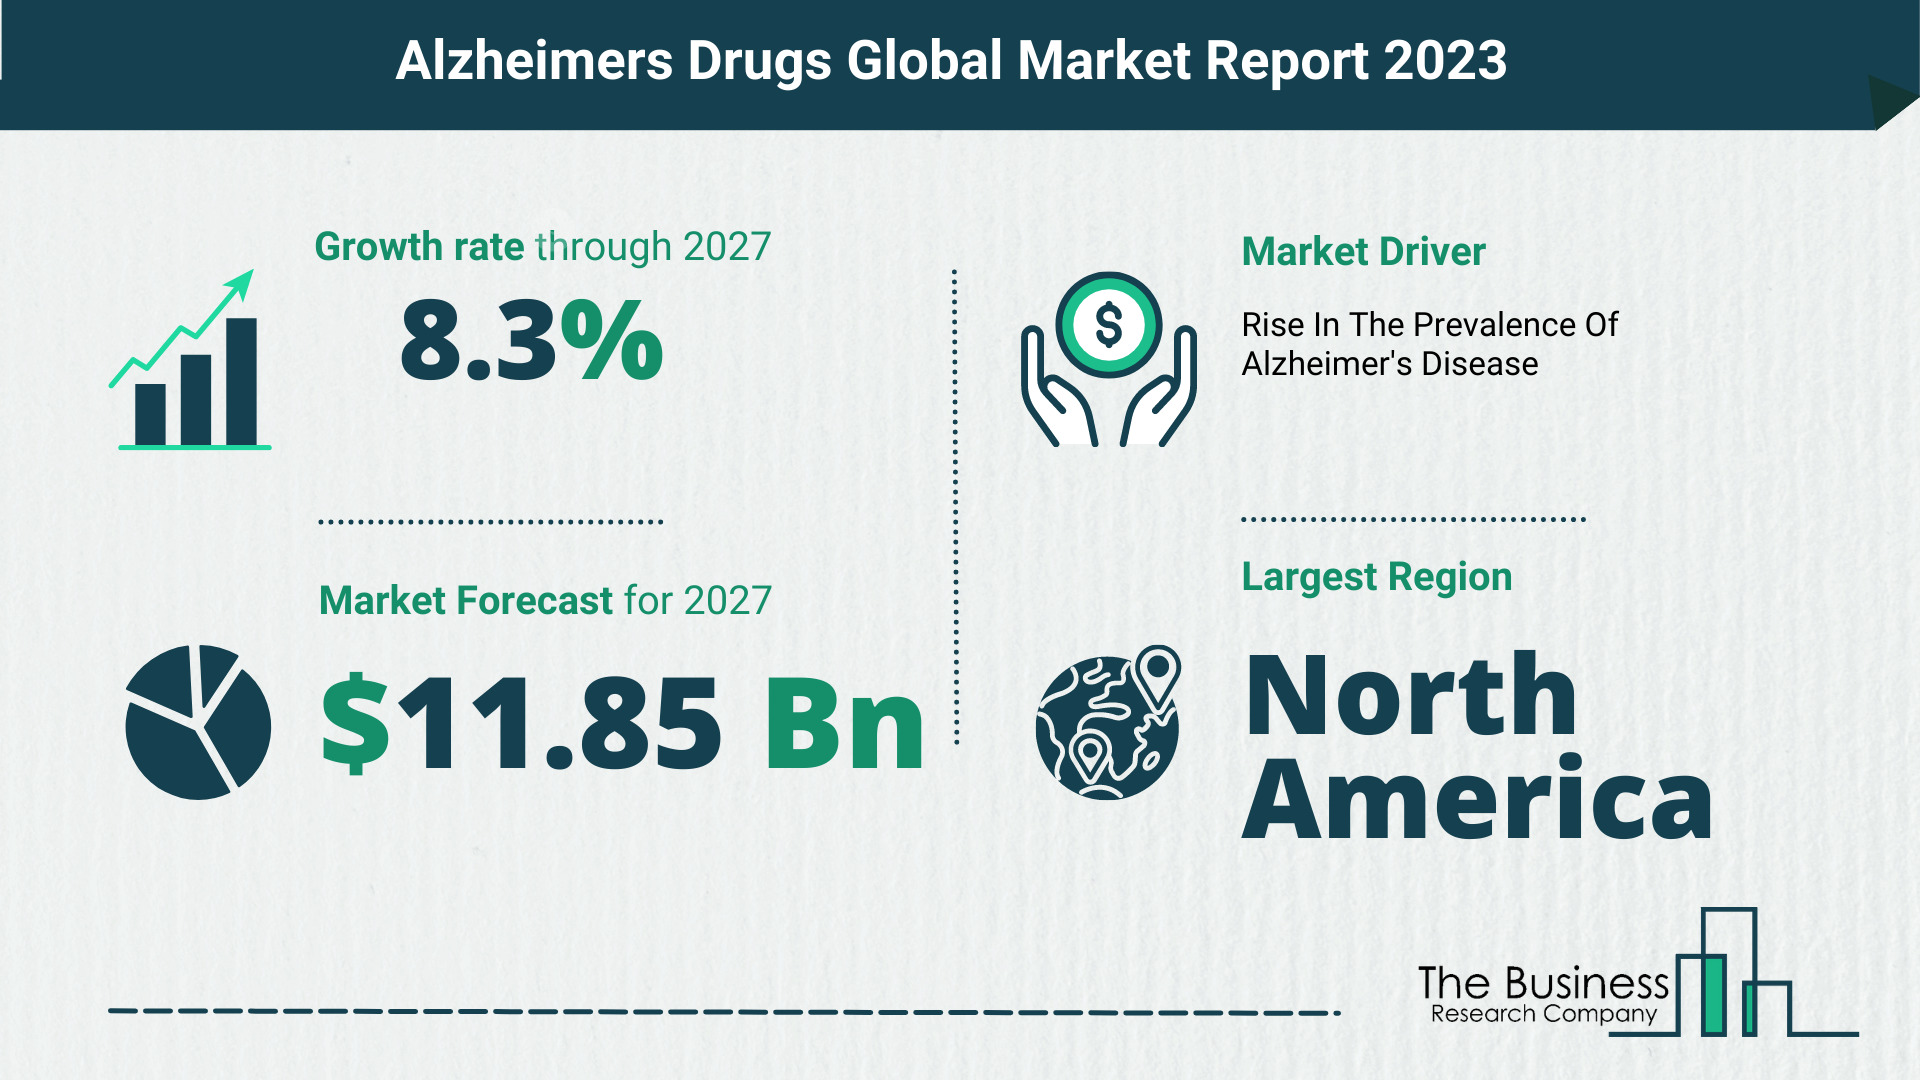 Alzheimers Drugs Market Size, Share, And Growth Rate Analysis 2023